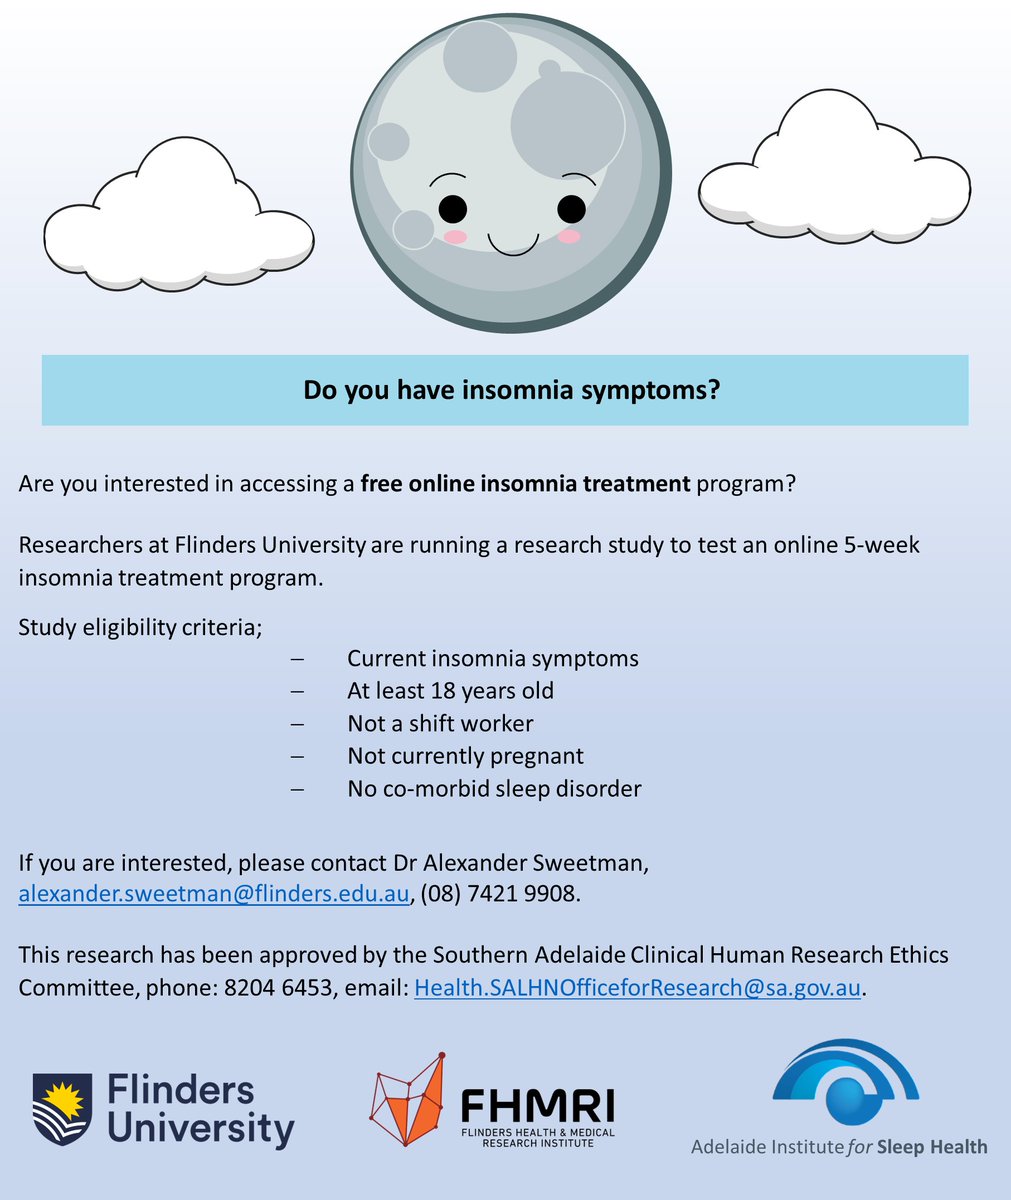 We are recruiting people with #insomnia to an online cognitive behavioural therapy for insomnia study in Australia. Please share with your networks/anyone that might be interested. #CBTi #sleep